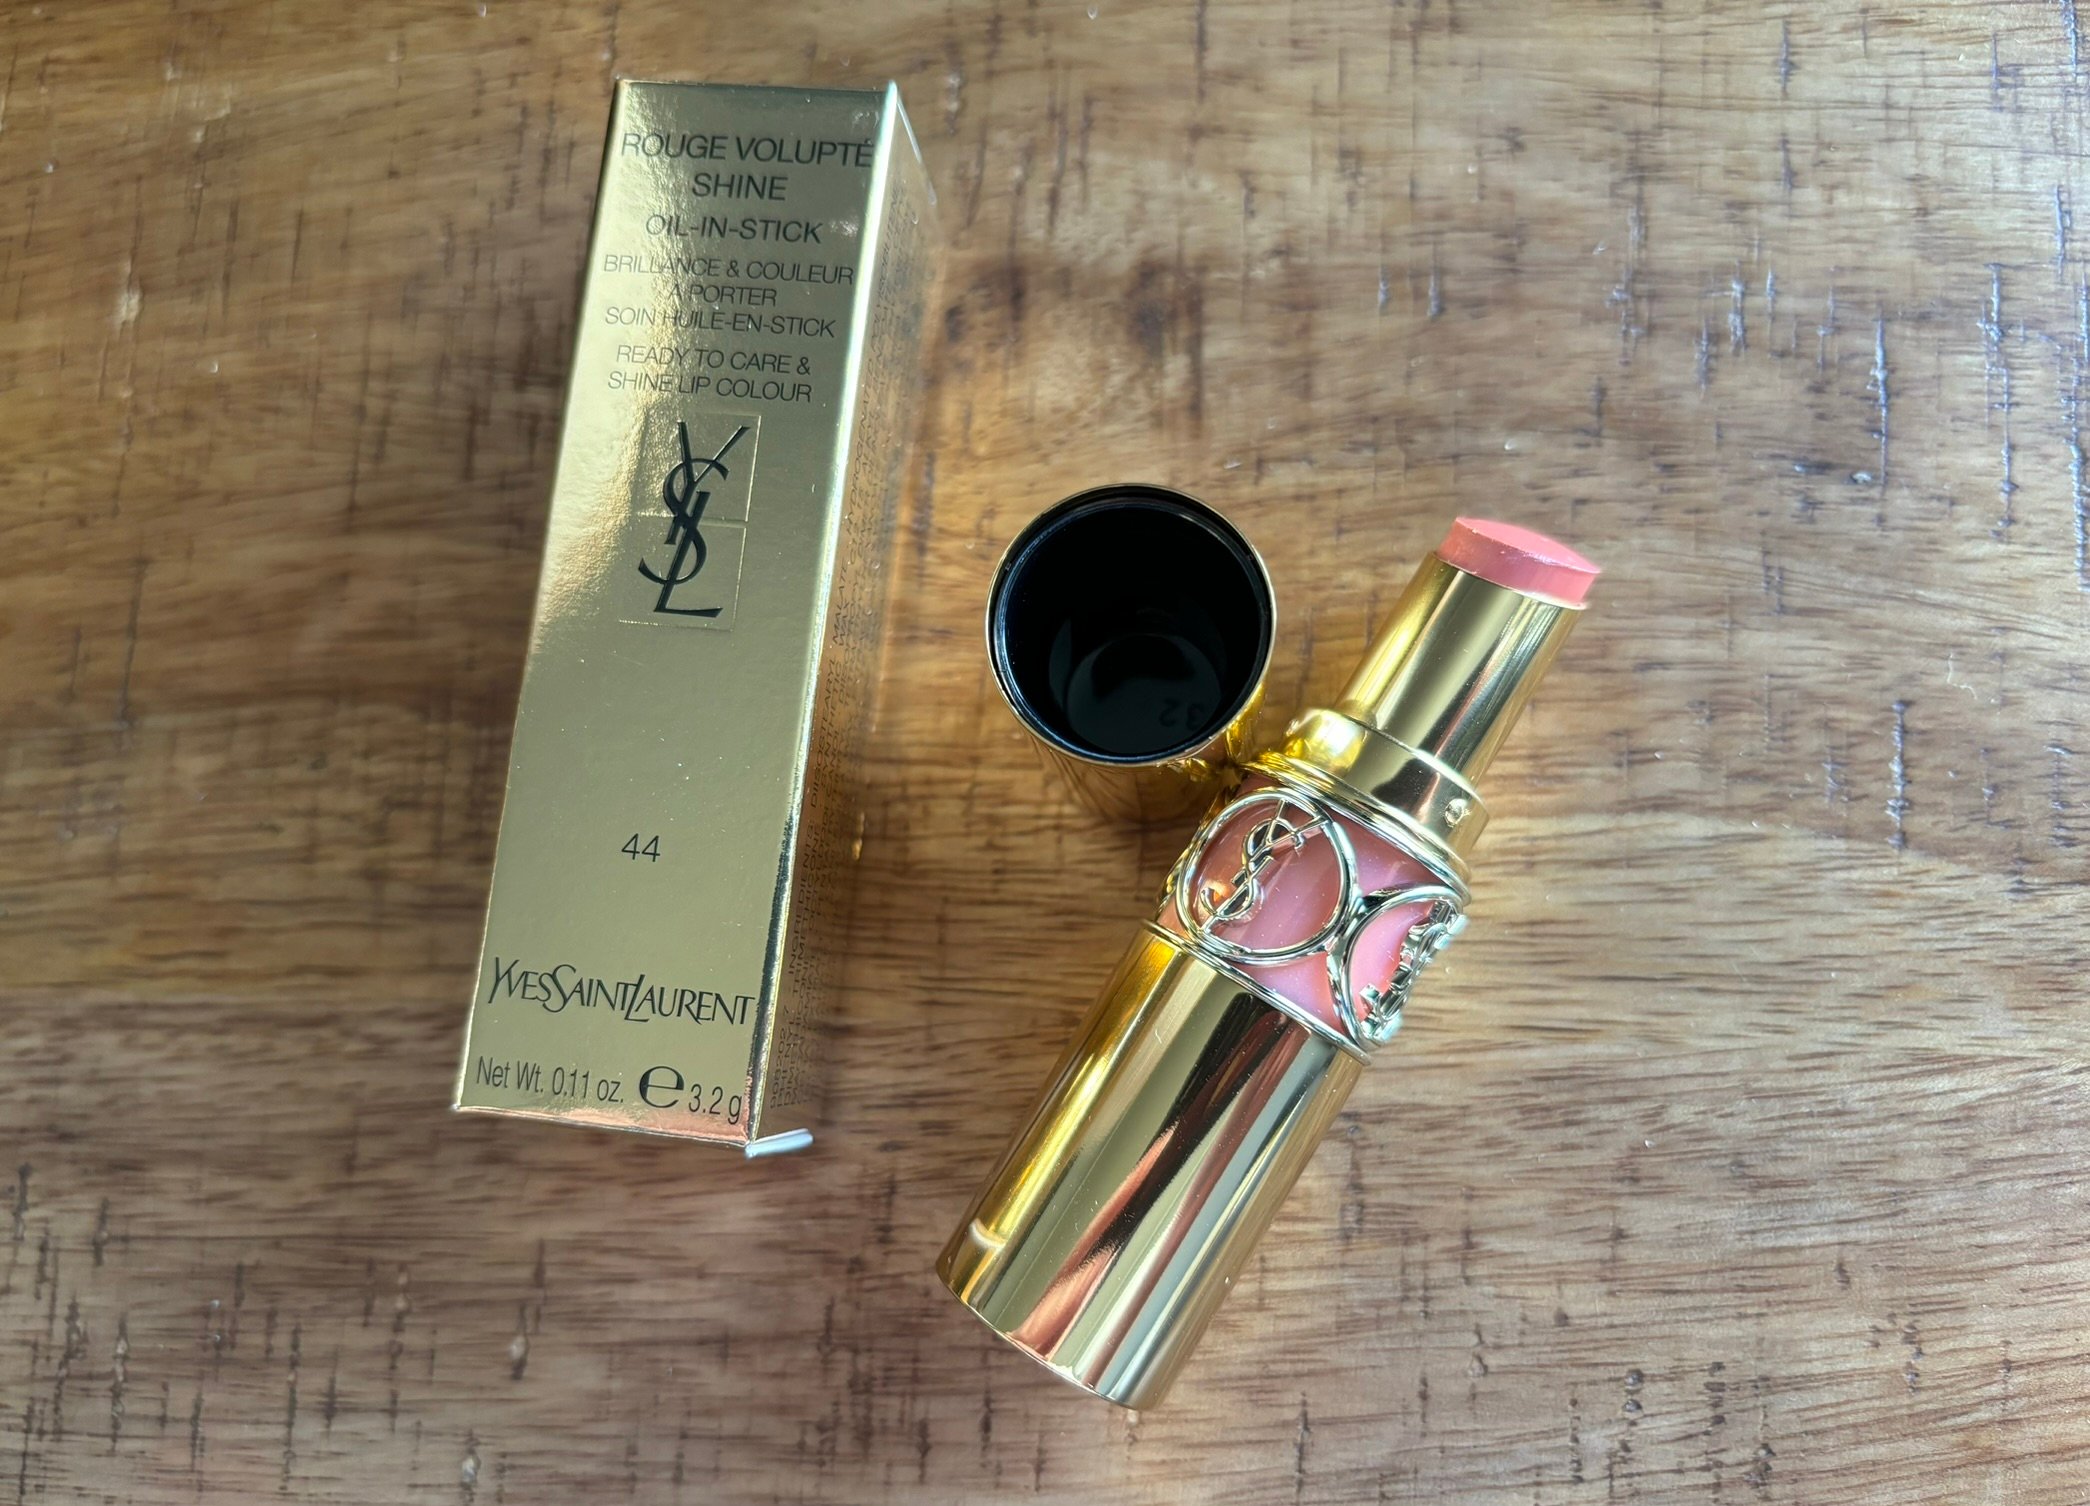 Yves Saint Laurent lipstick in Nude Lavalliere shade